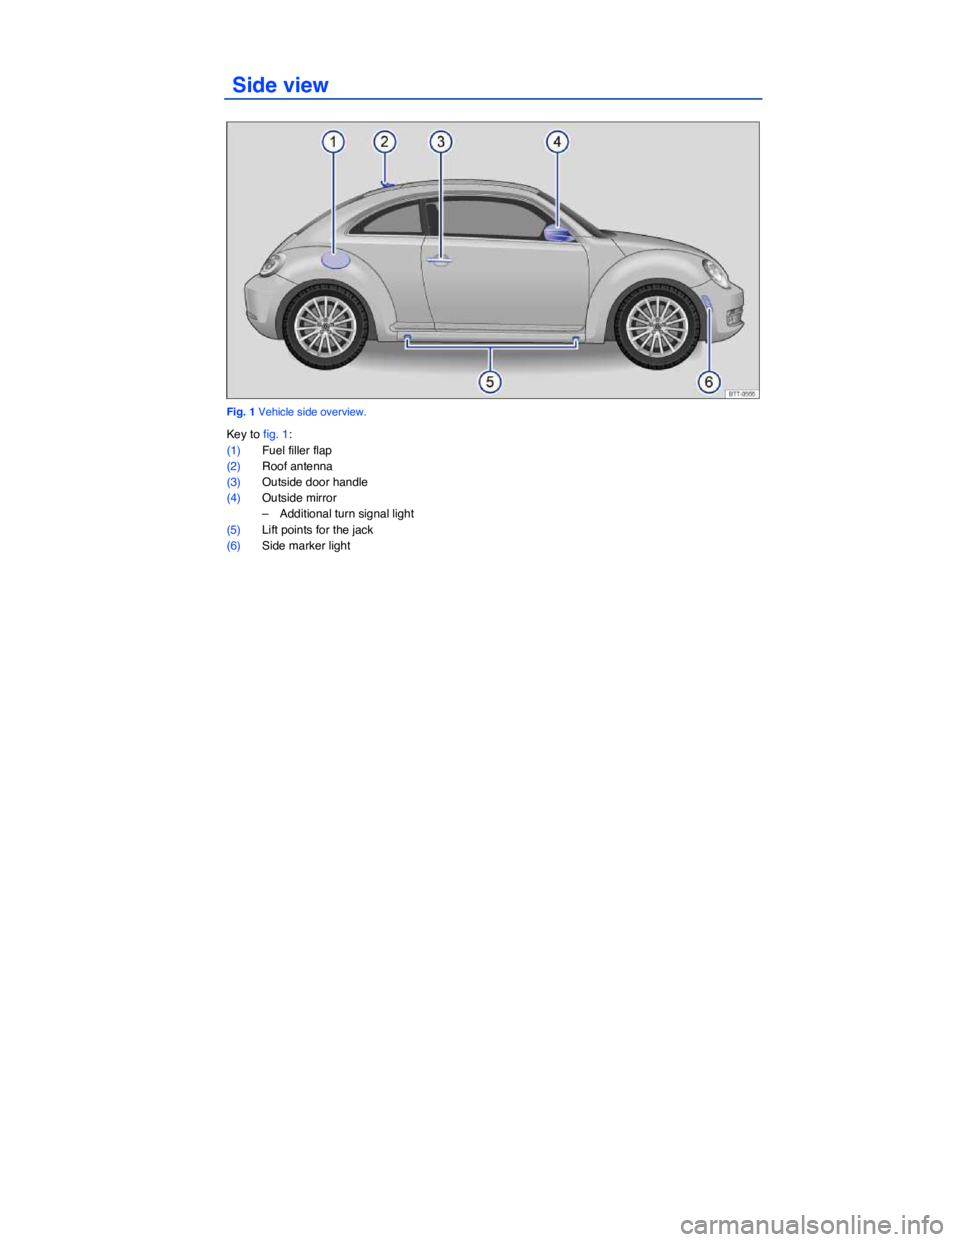 VOLKSWAGEN BEETLE 2017  Owners Manual  
 Side view 
 
Fig. 1 Vehicle side overview. 
Key to fig. 1: 
(1) Fuel filler flap  
(2) Roof antenna                                                                                                  